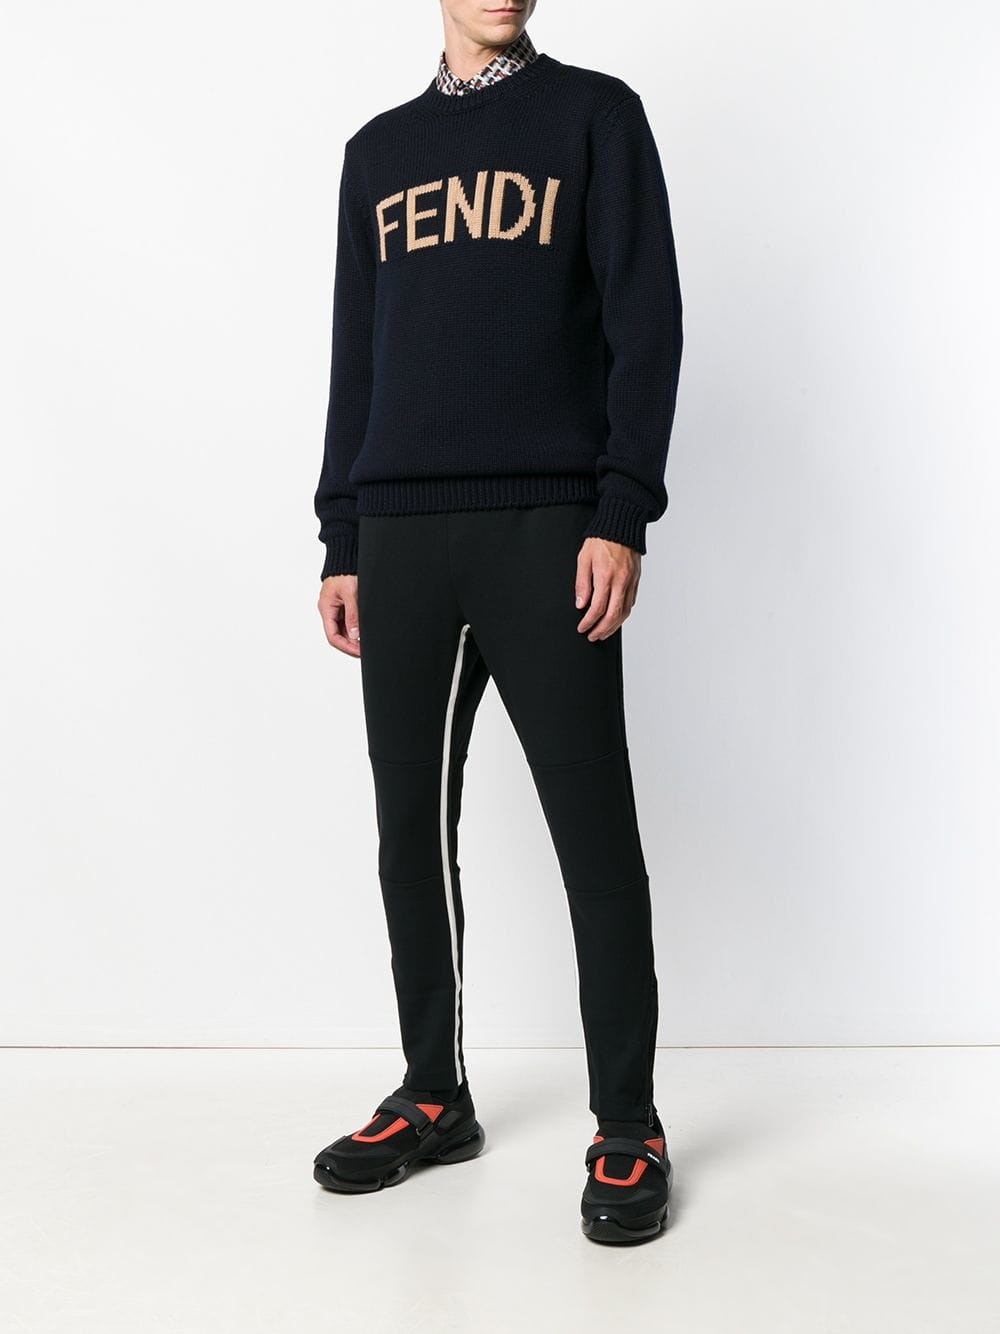 fendi LOGO PULLOVER available on montiboutique.com - 24952